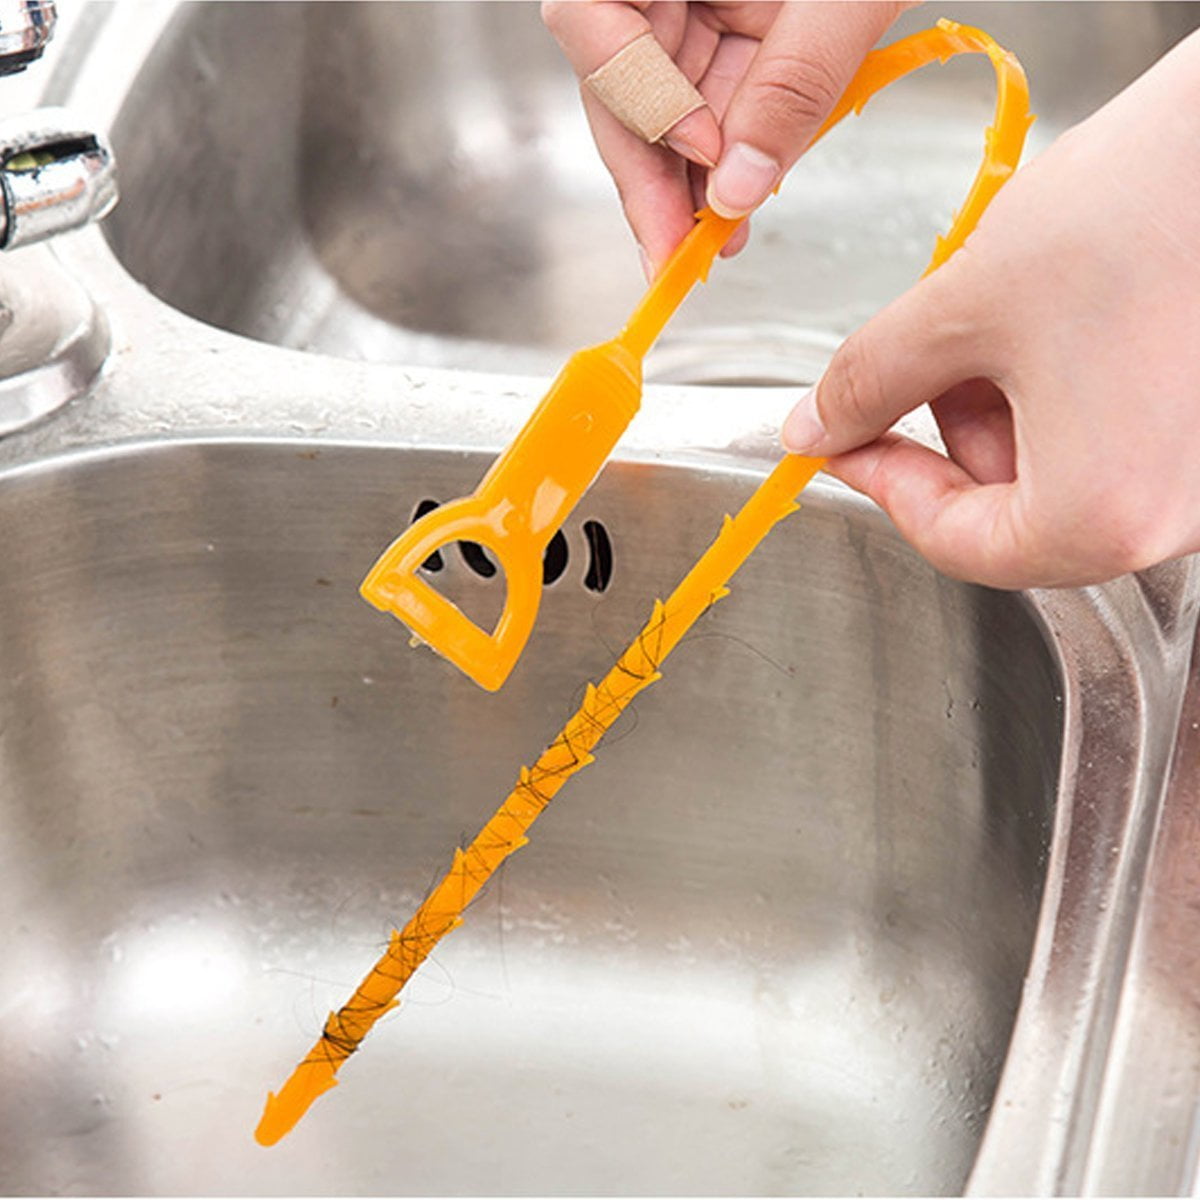 6pcs/Set Drain Clog Remover Plumbing Tool For Bathroom Shower & Bathtub  Drain Cleaner Sink Unclogger Hair Catcher Stick Pipe Tub - AliExpress